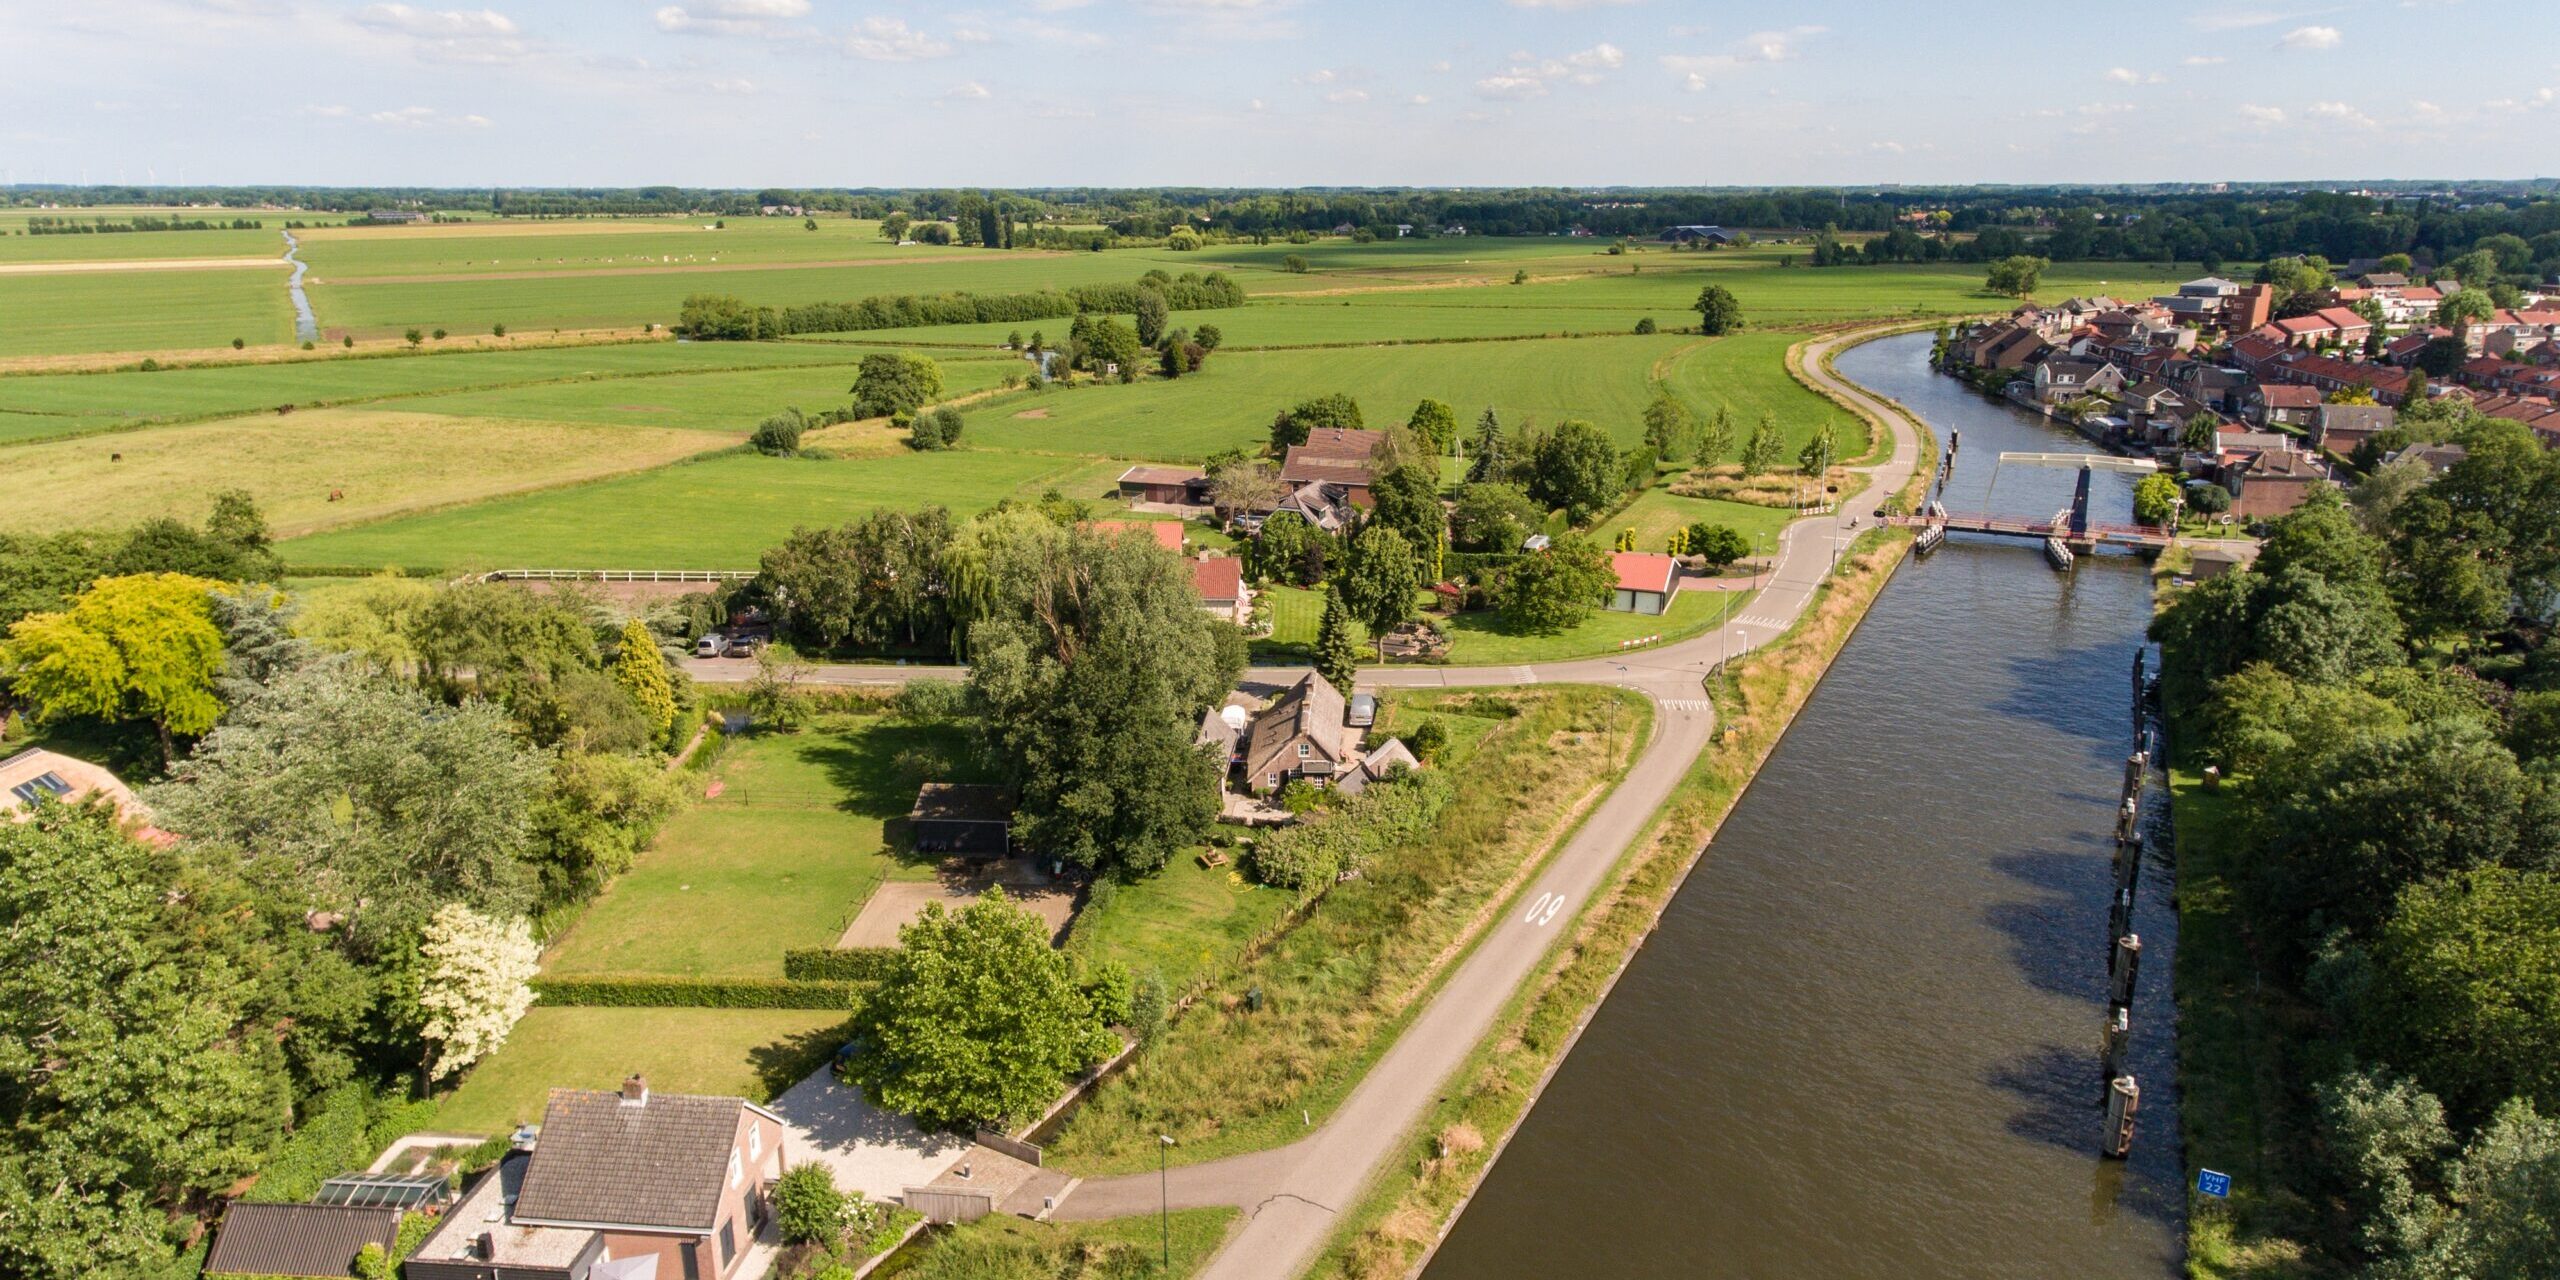 An aerial shot of the Zederik canal near the Arkel village located in the Netherlands